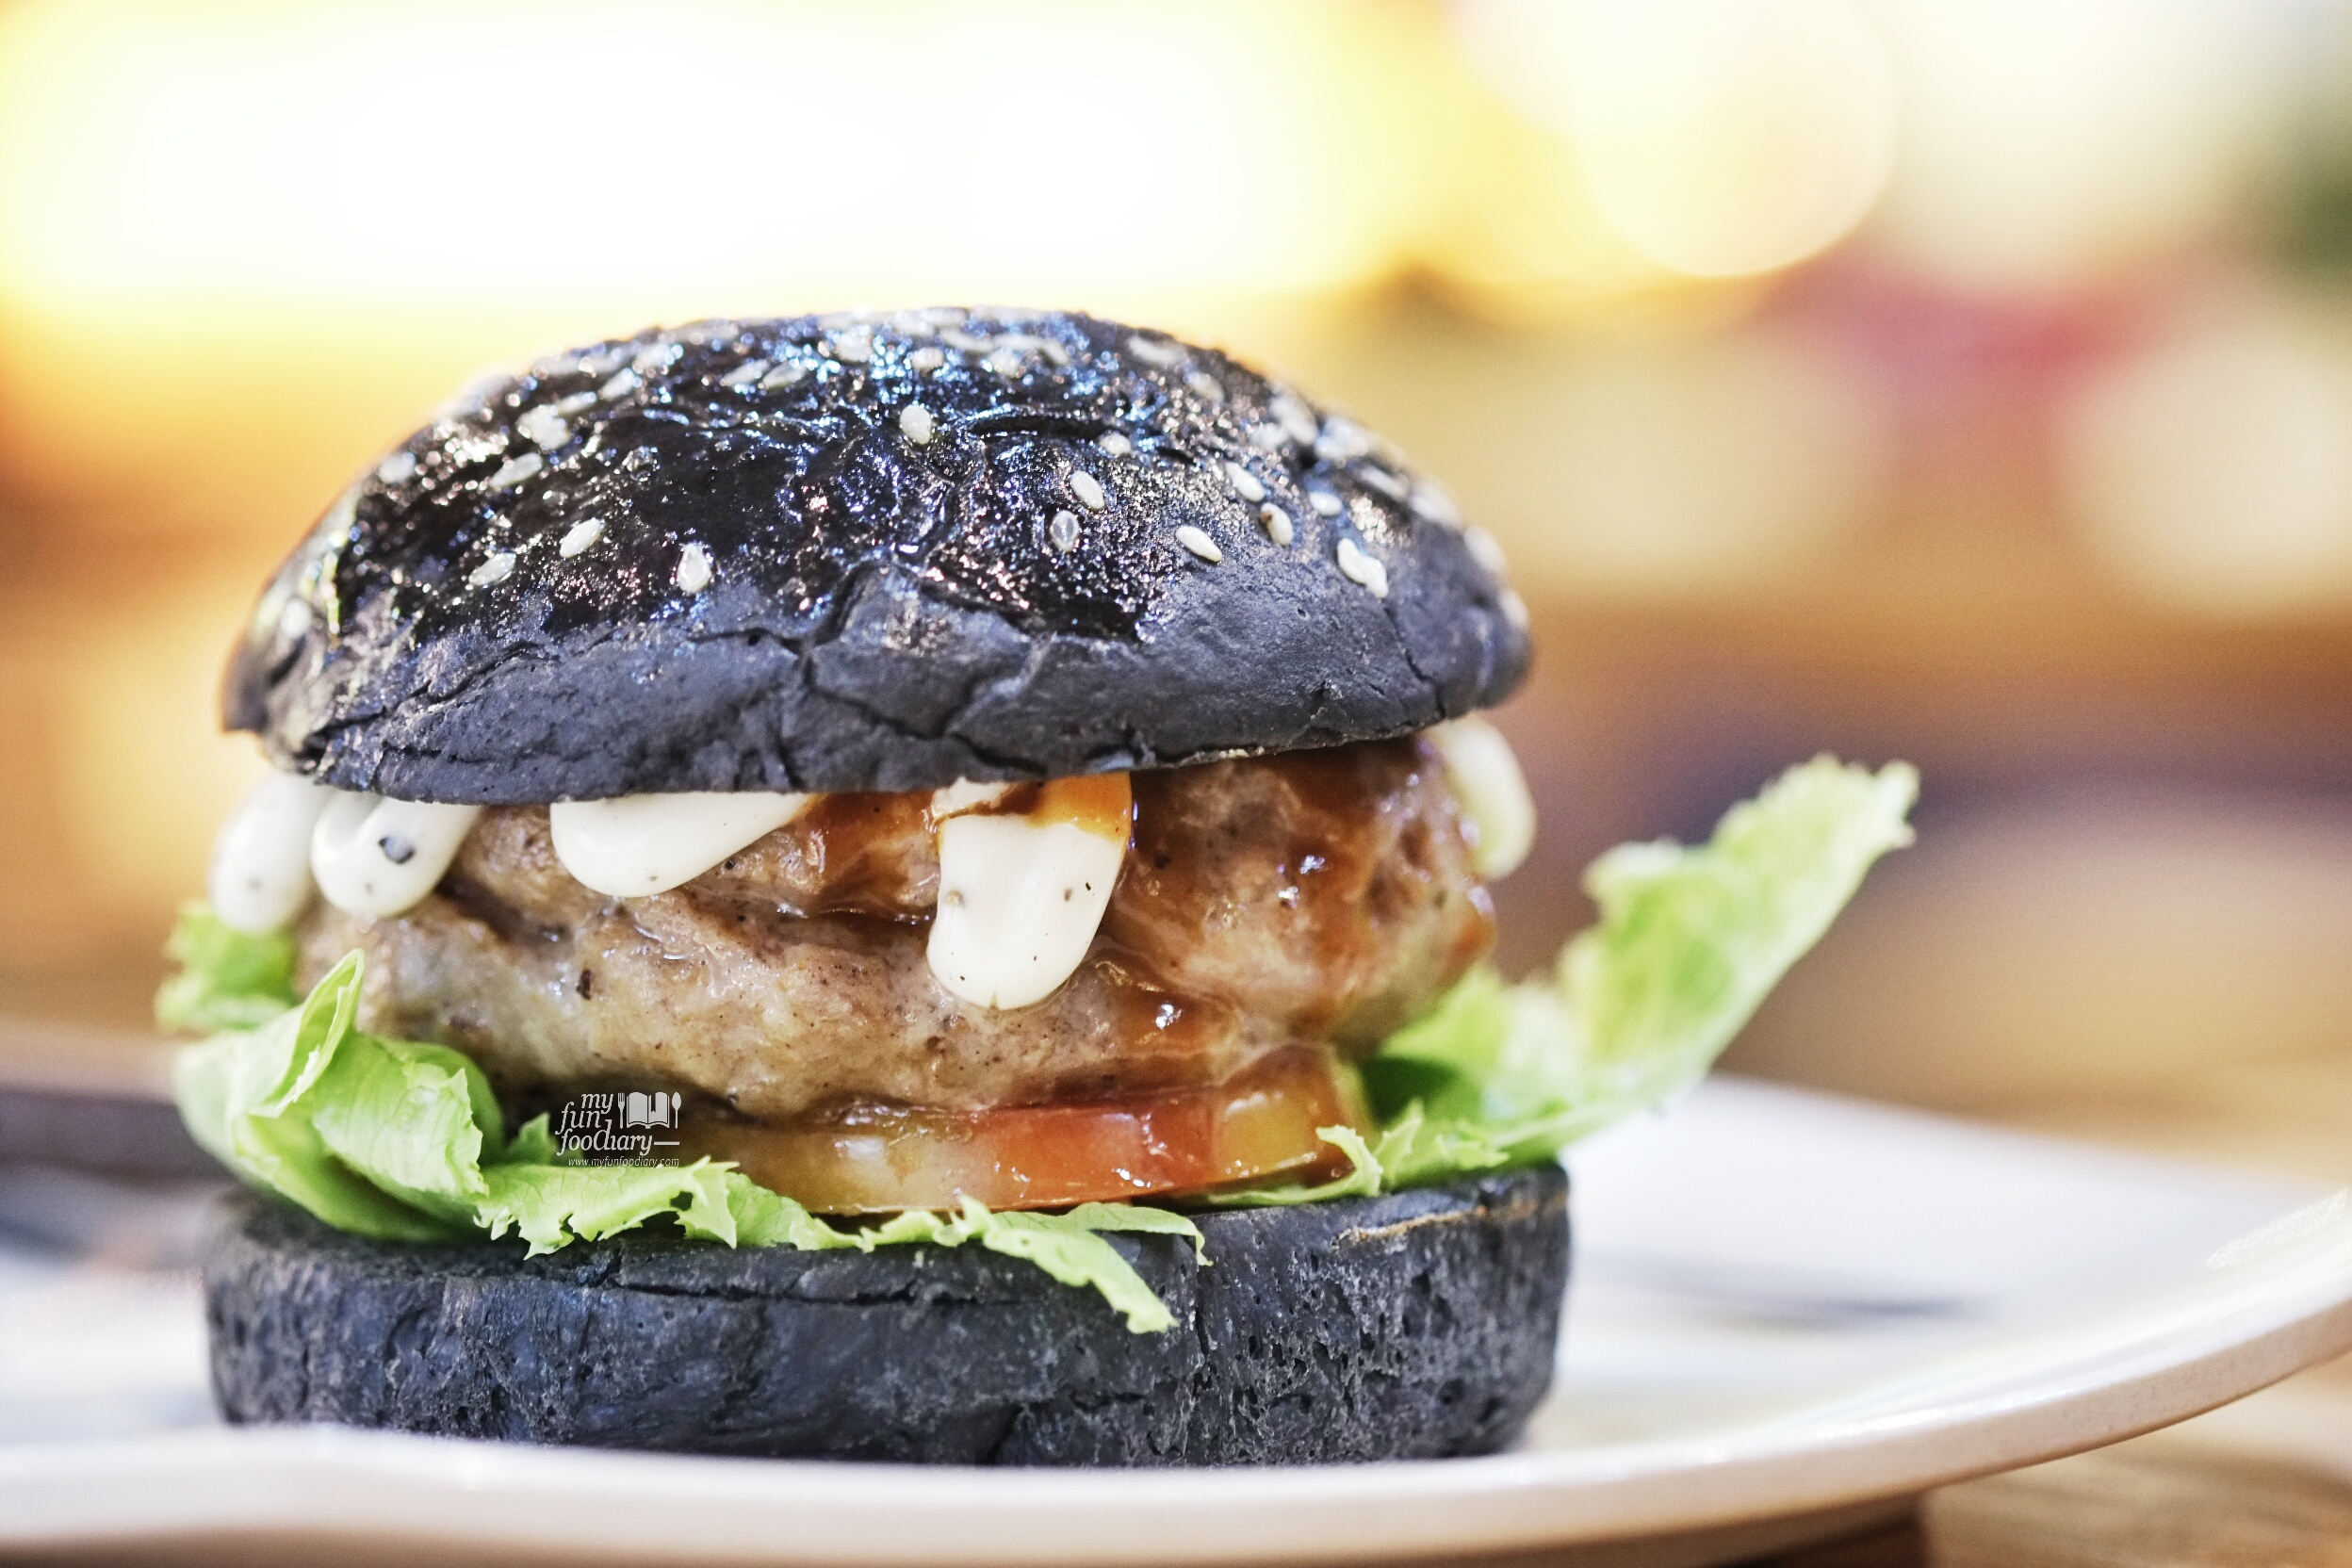 The Black Burger at Seven 8 Nine by Myfunfoodiary 02